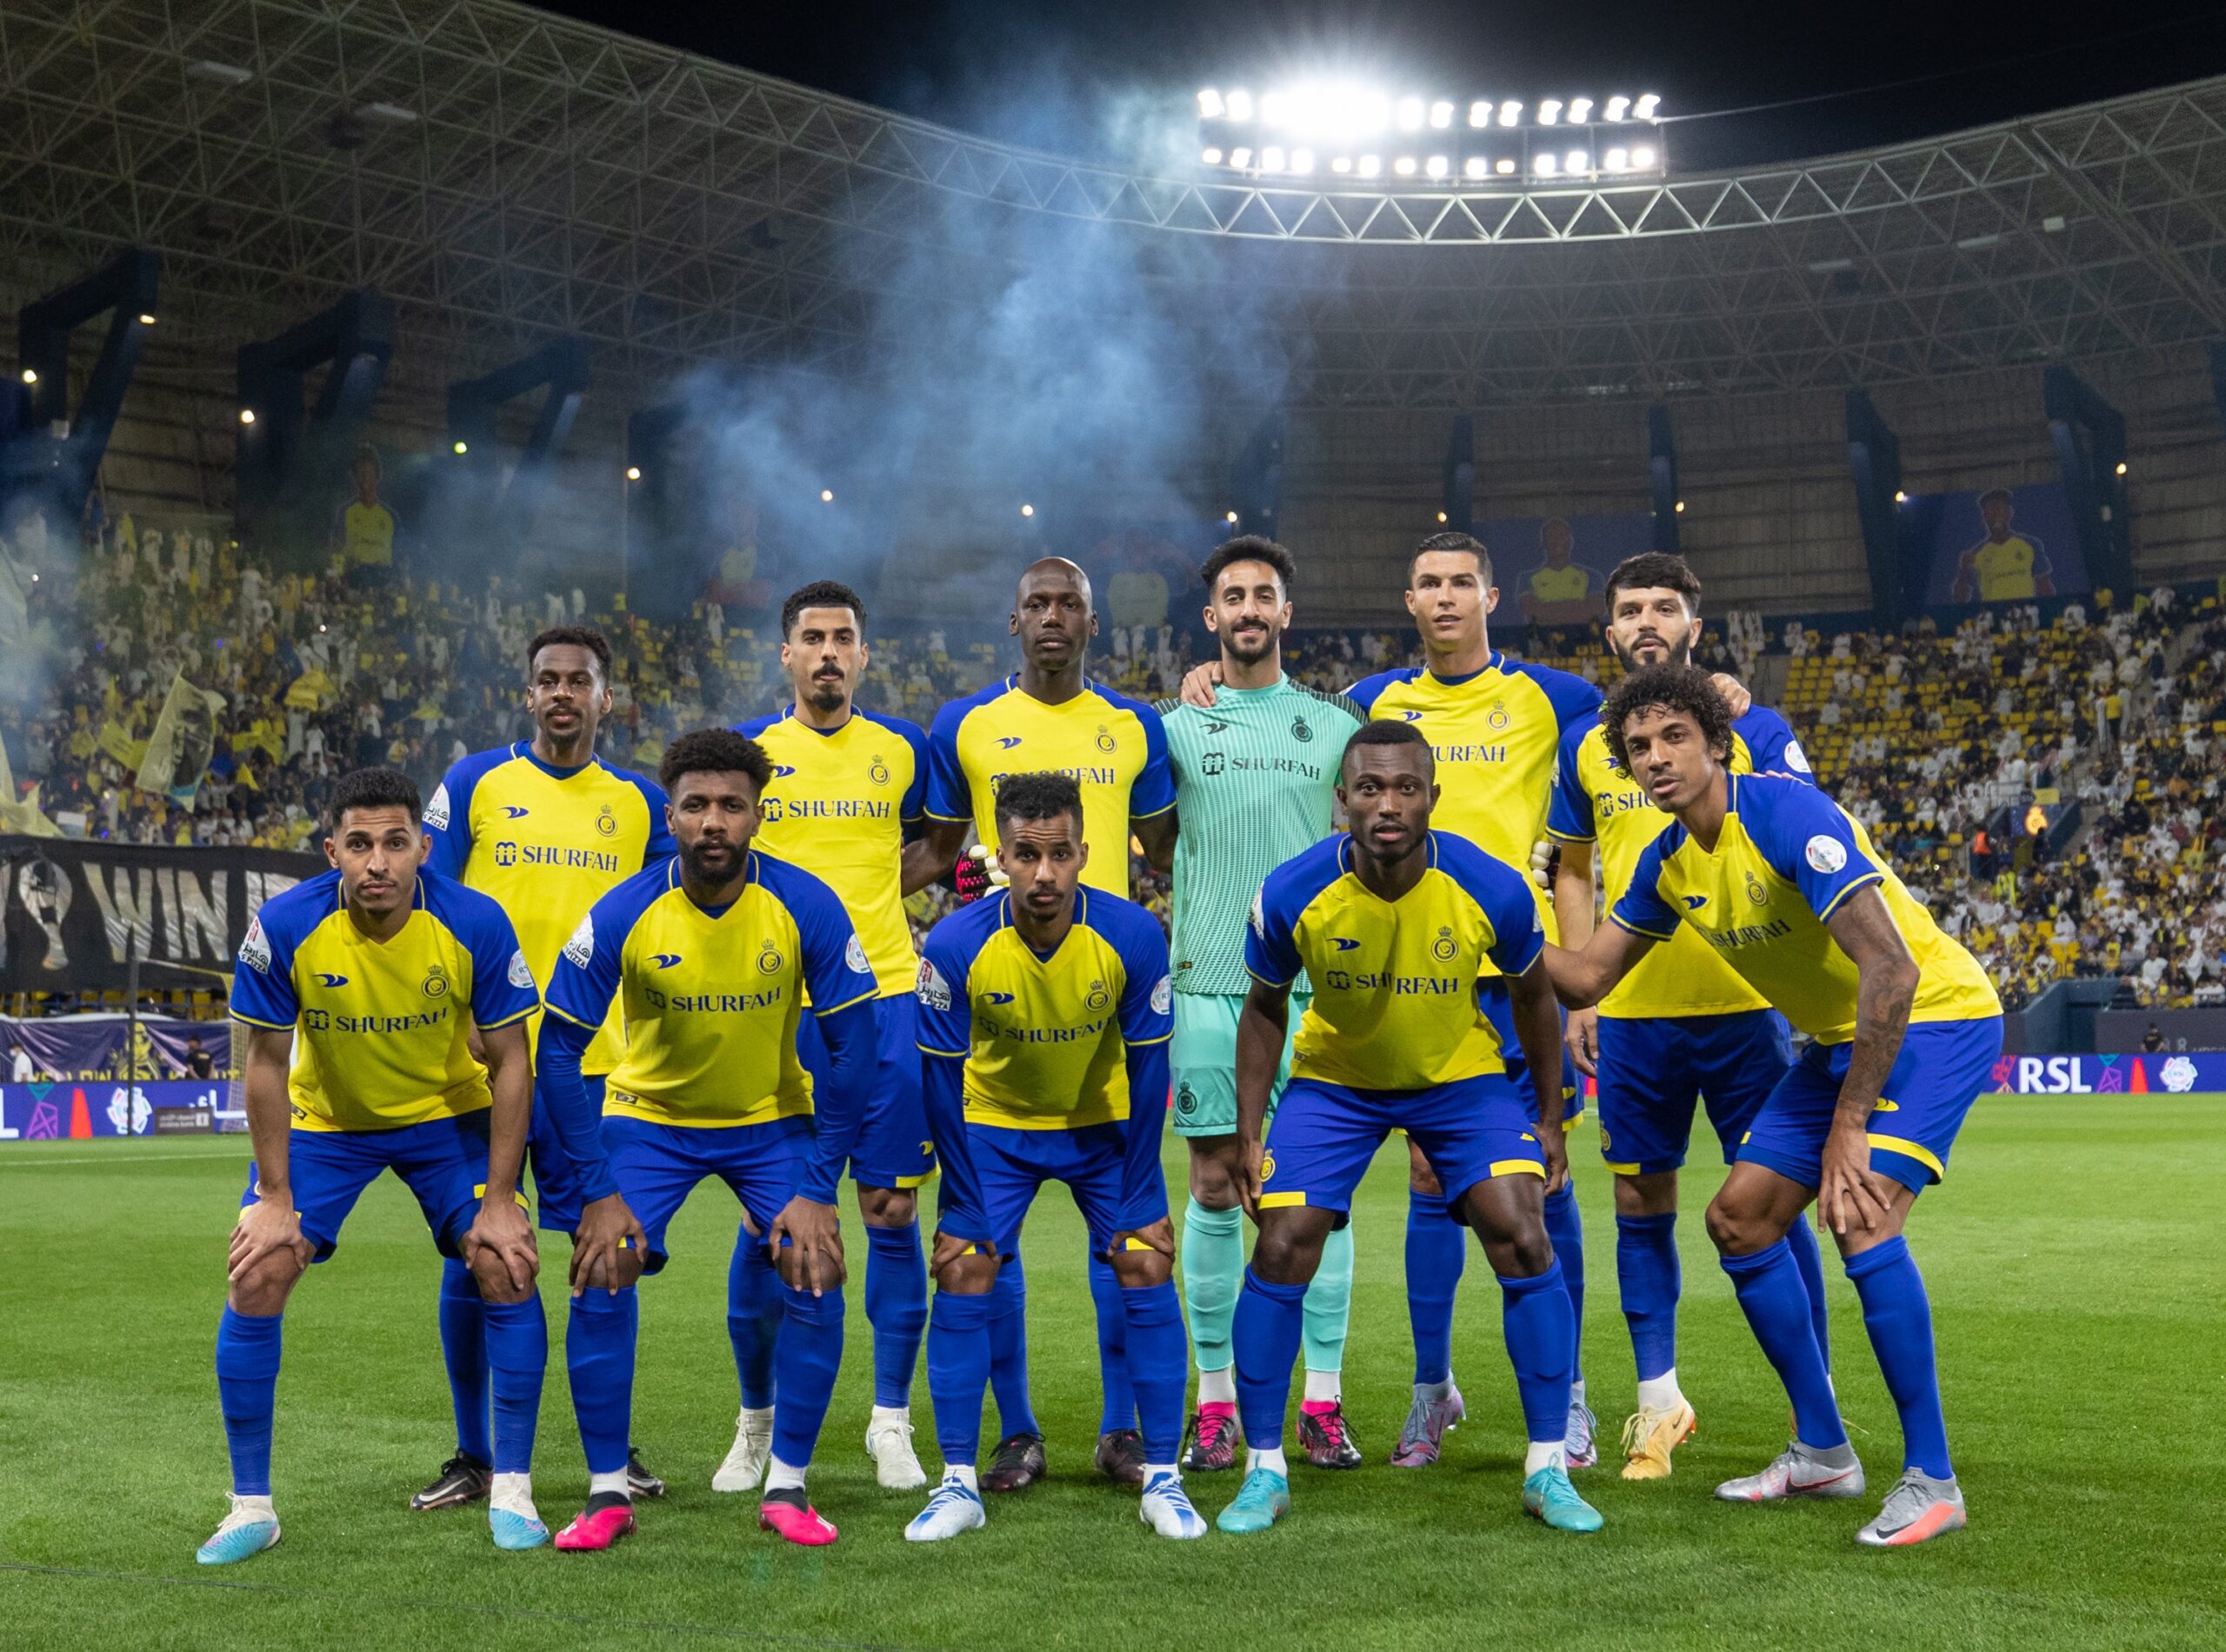 Saudi victory threatened by absence of two team stars ahead of Abha in the cup